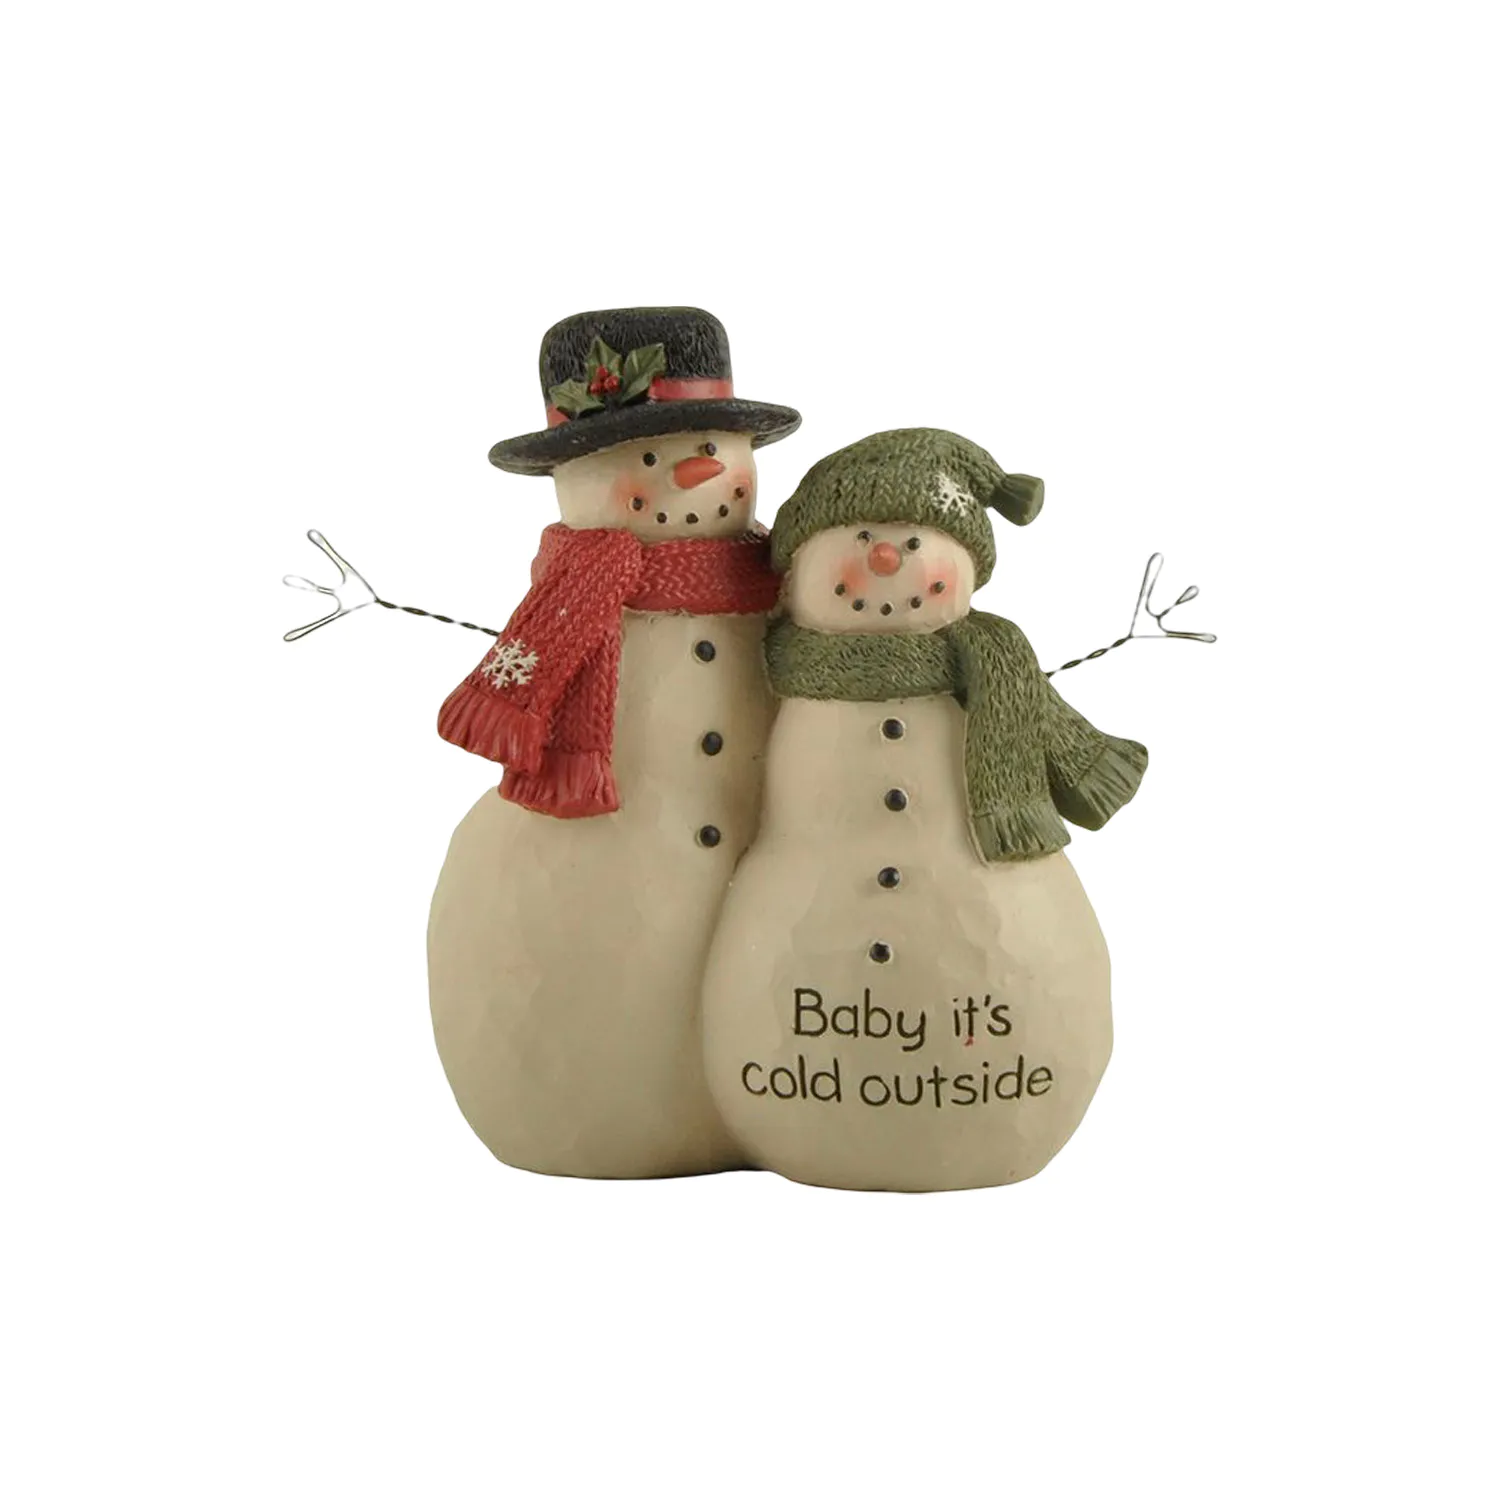 Figurine Manufacturers Winter Decorations, 4.02'' Snowman Couple with Hats, Tabletop Decorations.228-13552